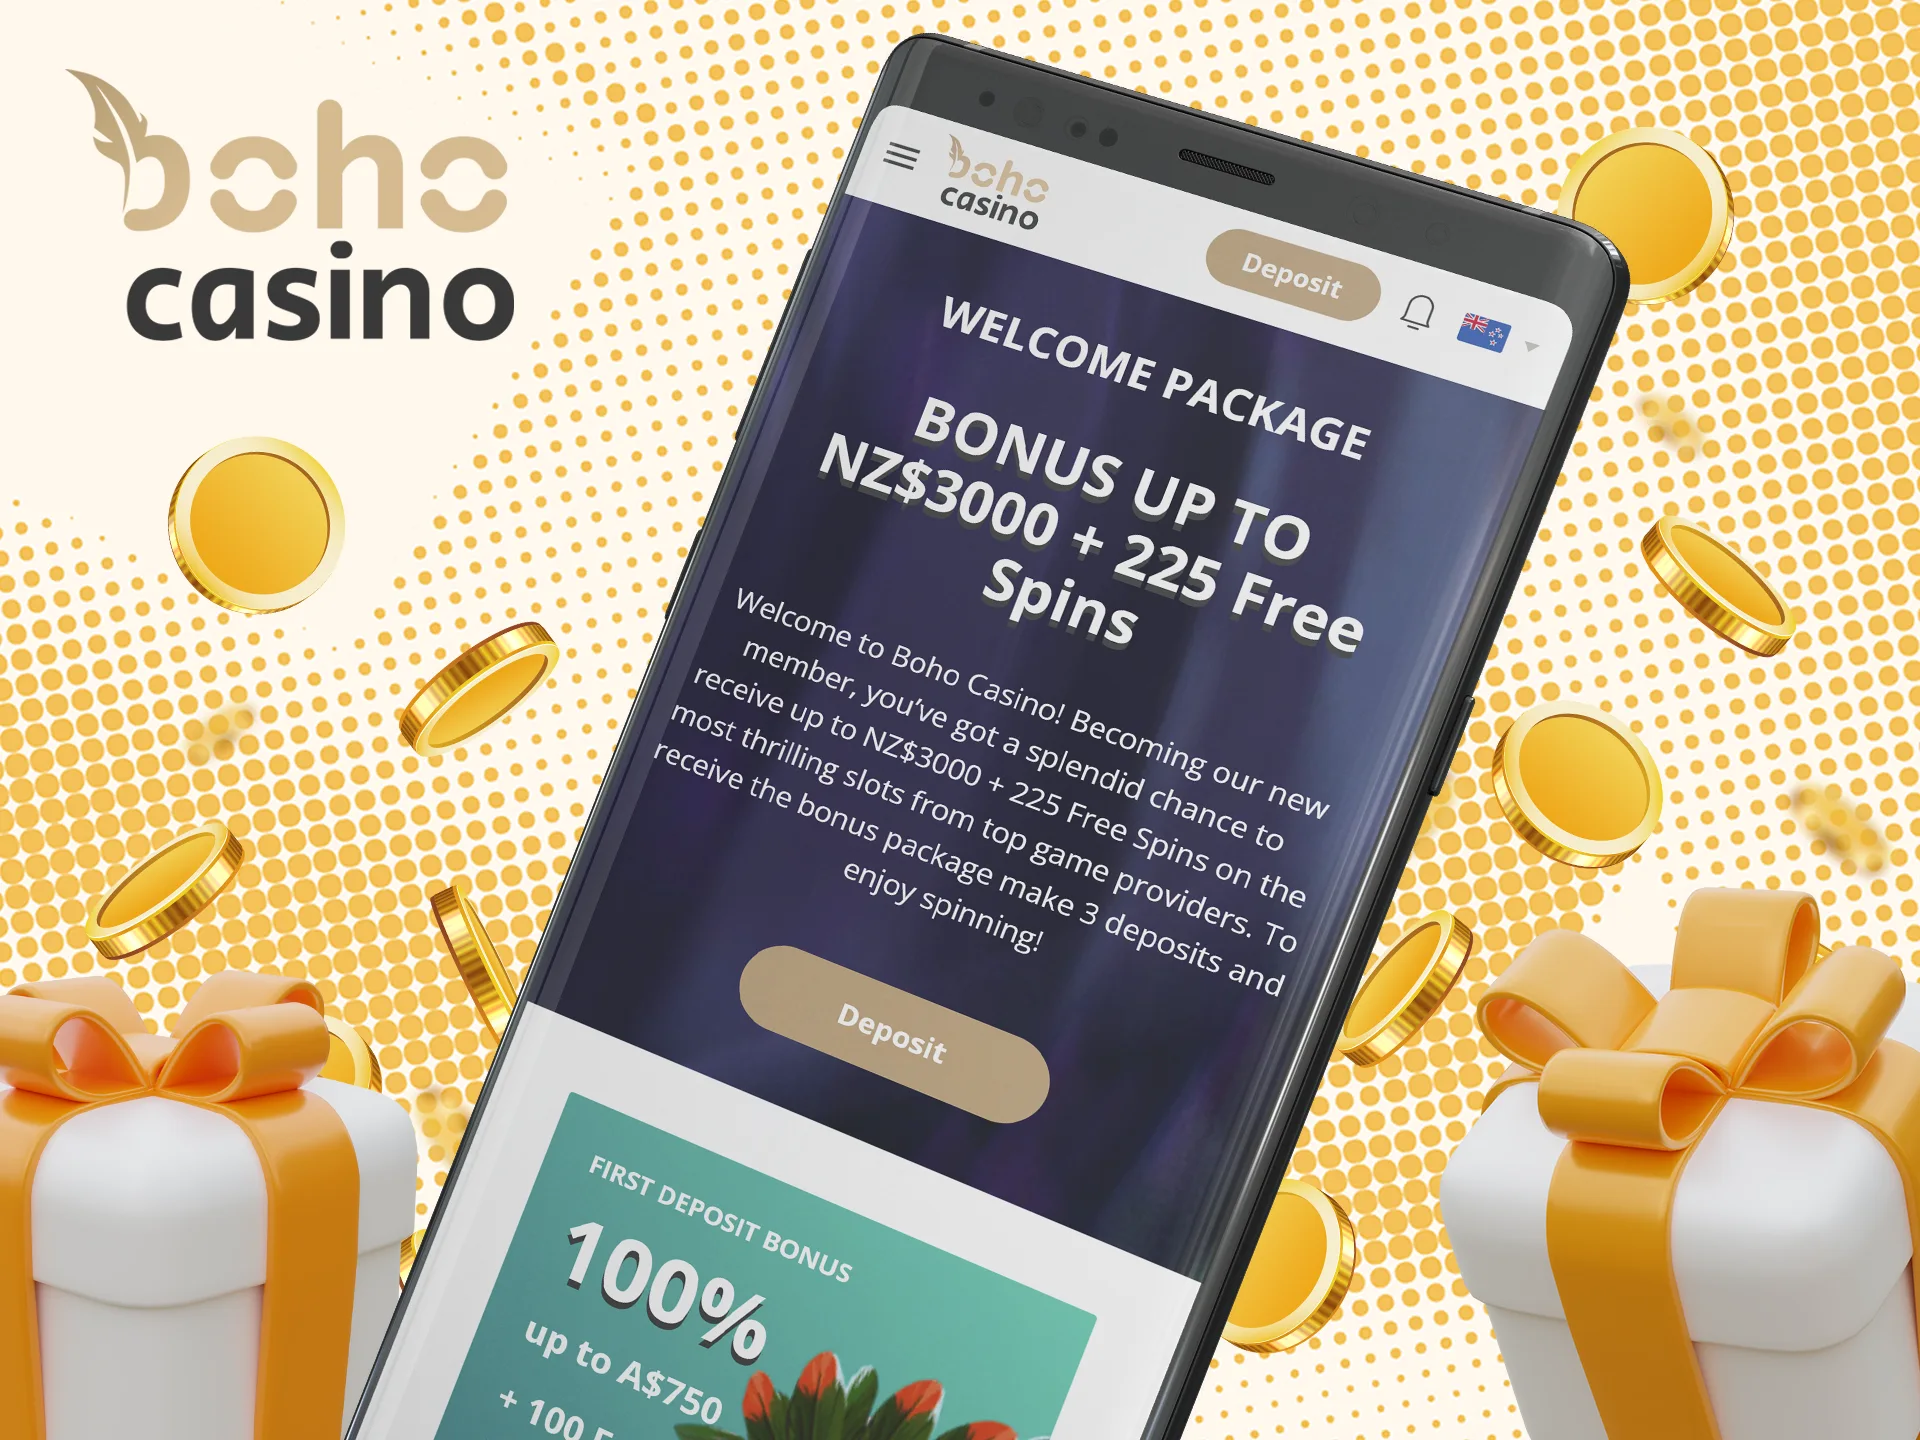 Make a deposit and claim your welcome bonus in the Boho Casino mobile app.